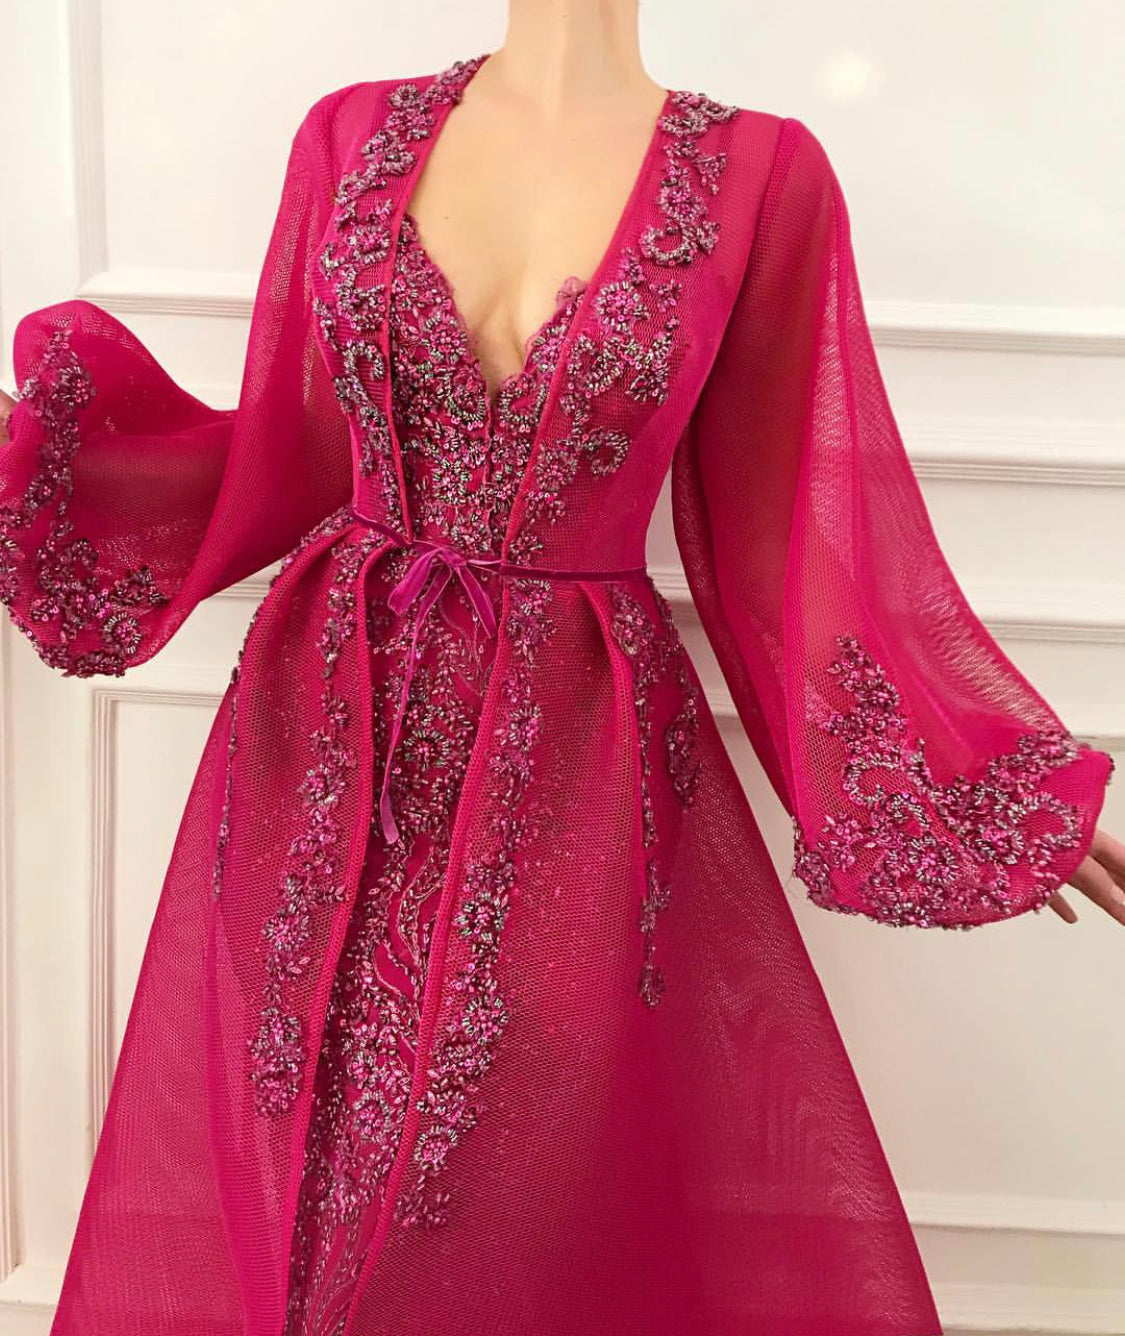 Pink overskirt dress with v-neck, long sleeves and embroidery